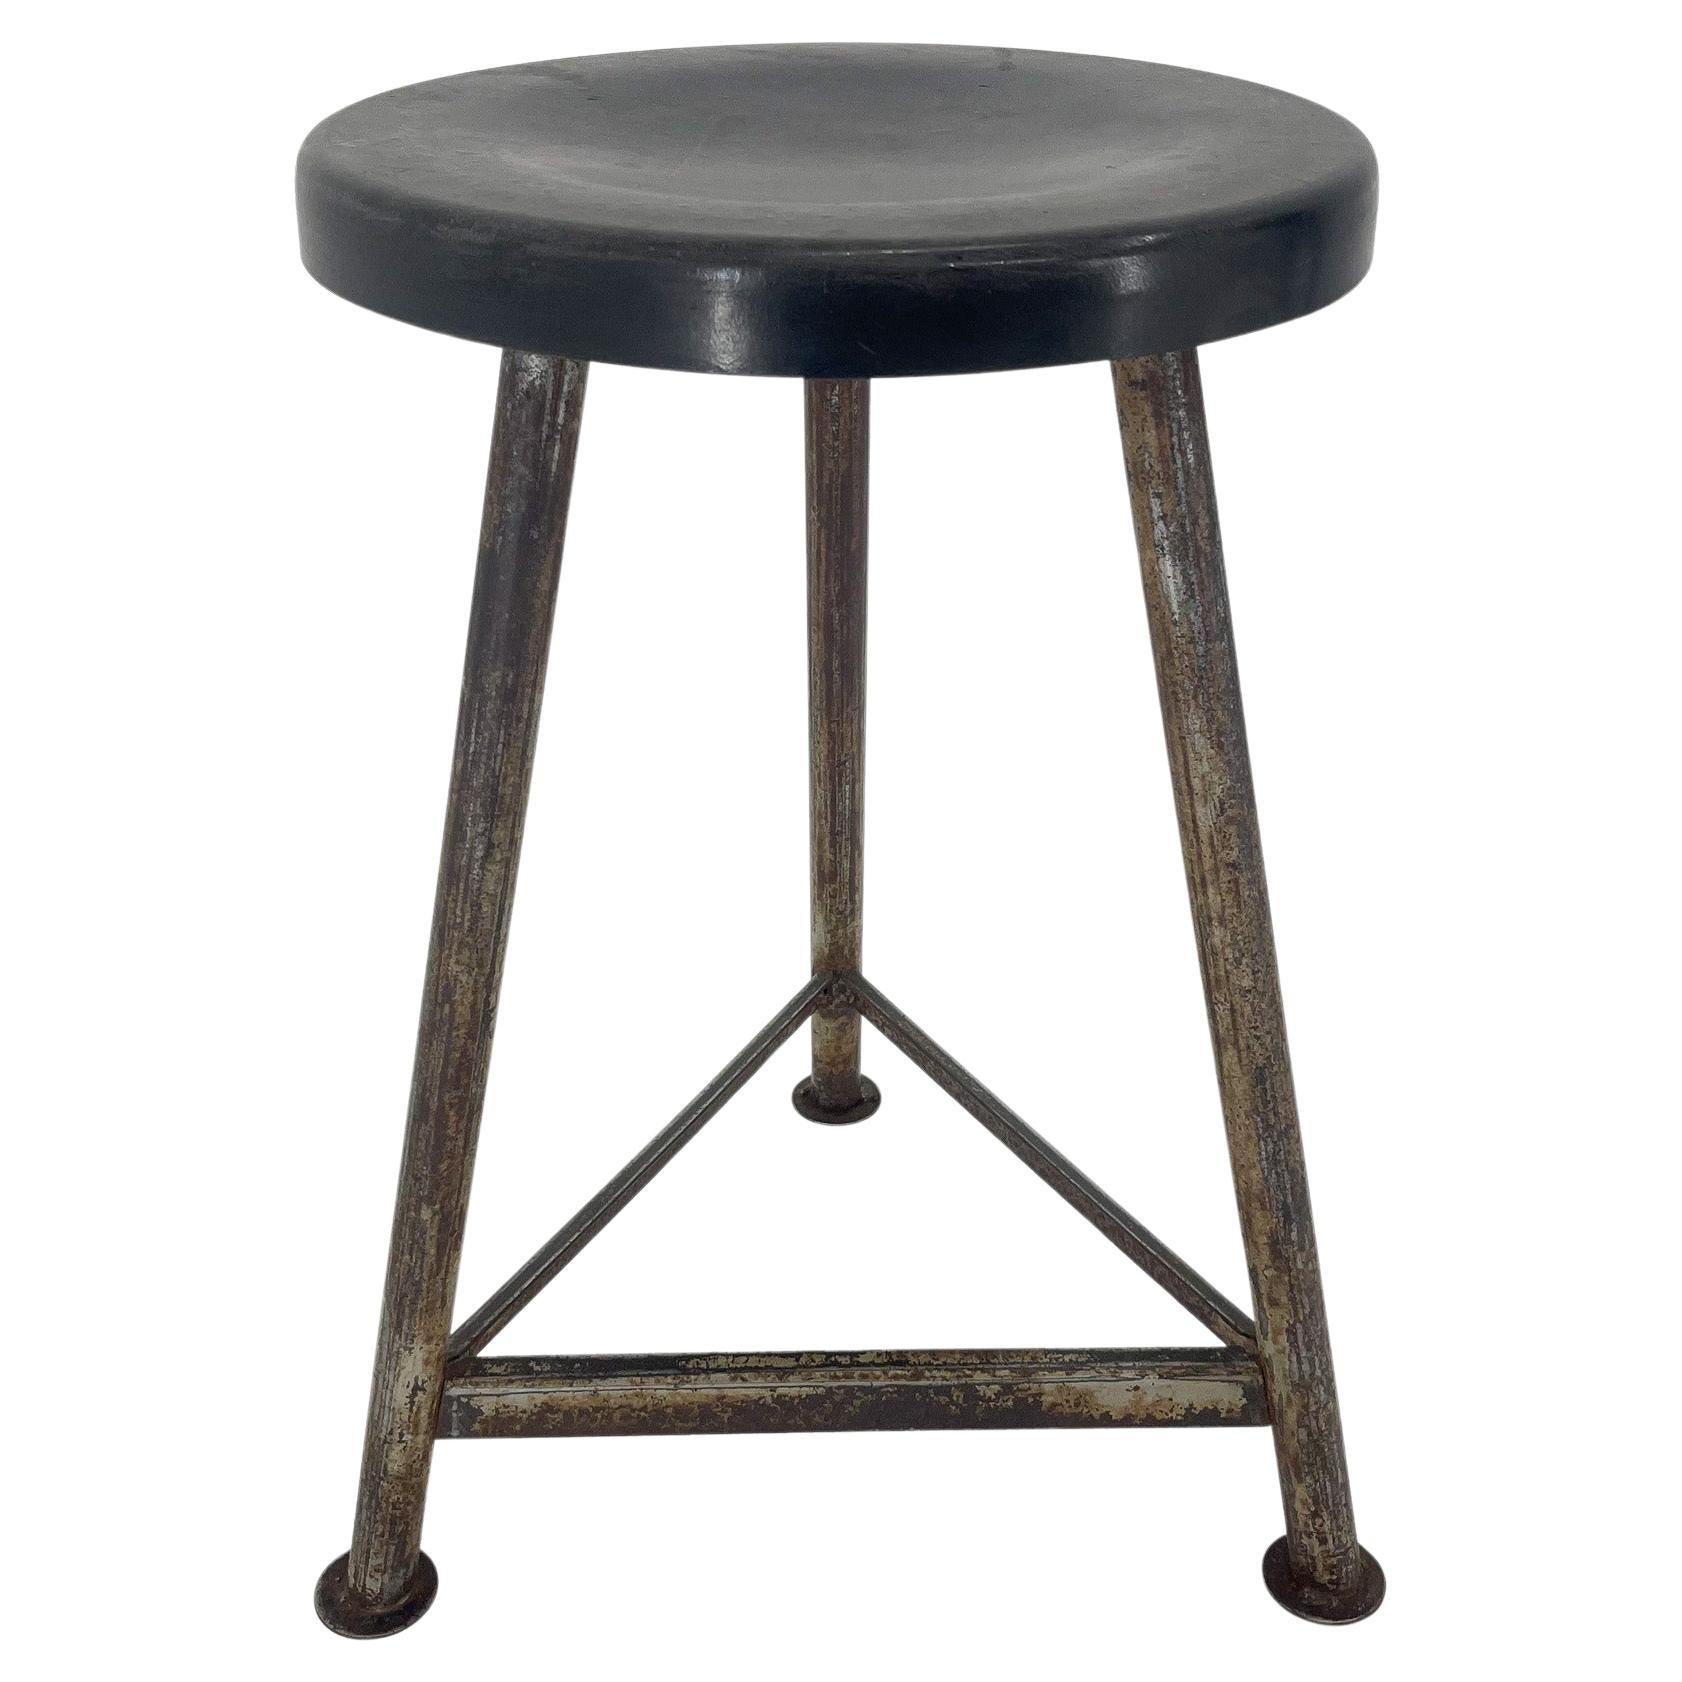 Vintage Industrial Iron Tripod Stool with Original Plastic Seat, 1950s For Sale